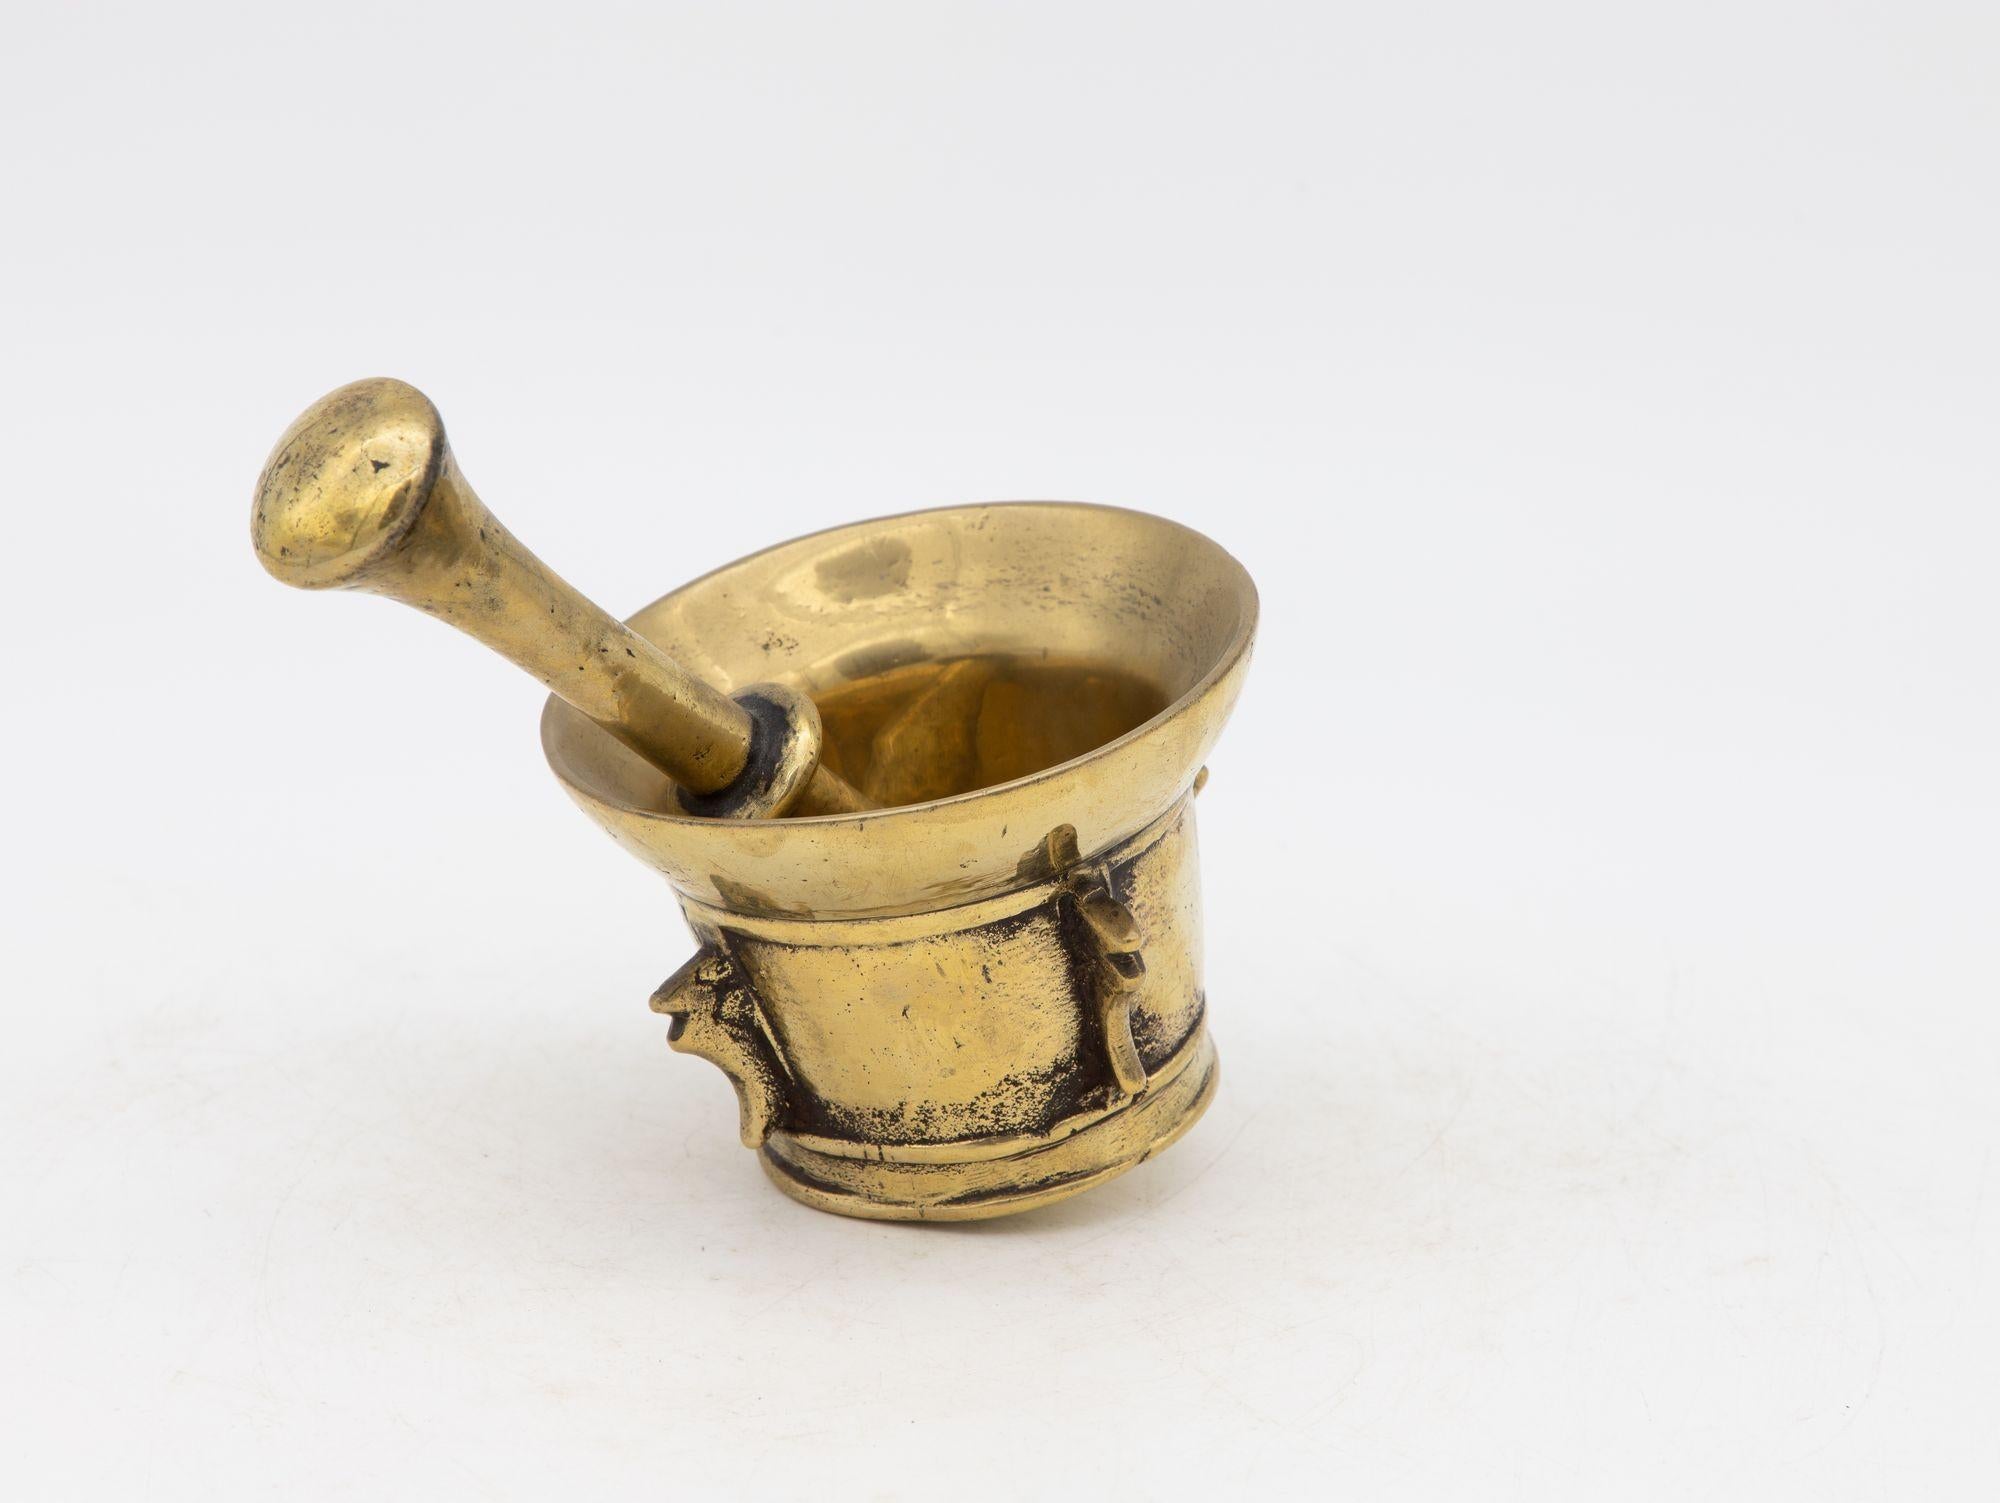 This early 20th-century mortar and pestle is made of brass with an honest patina. Both the mortar and pestle are traditional in style. The mortar has a classic bell-shaped body and the pestle has two flat ends. Brass mortar and pestles were used for